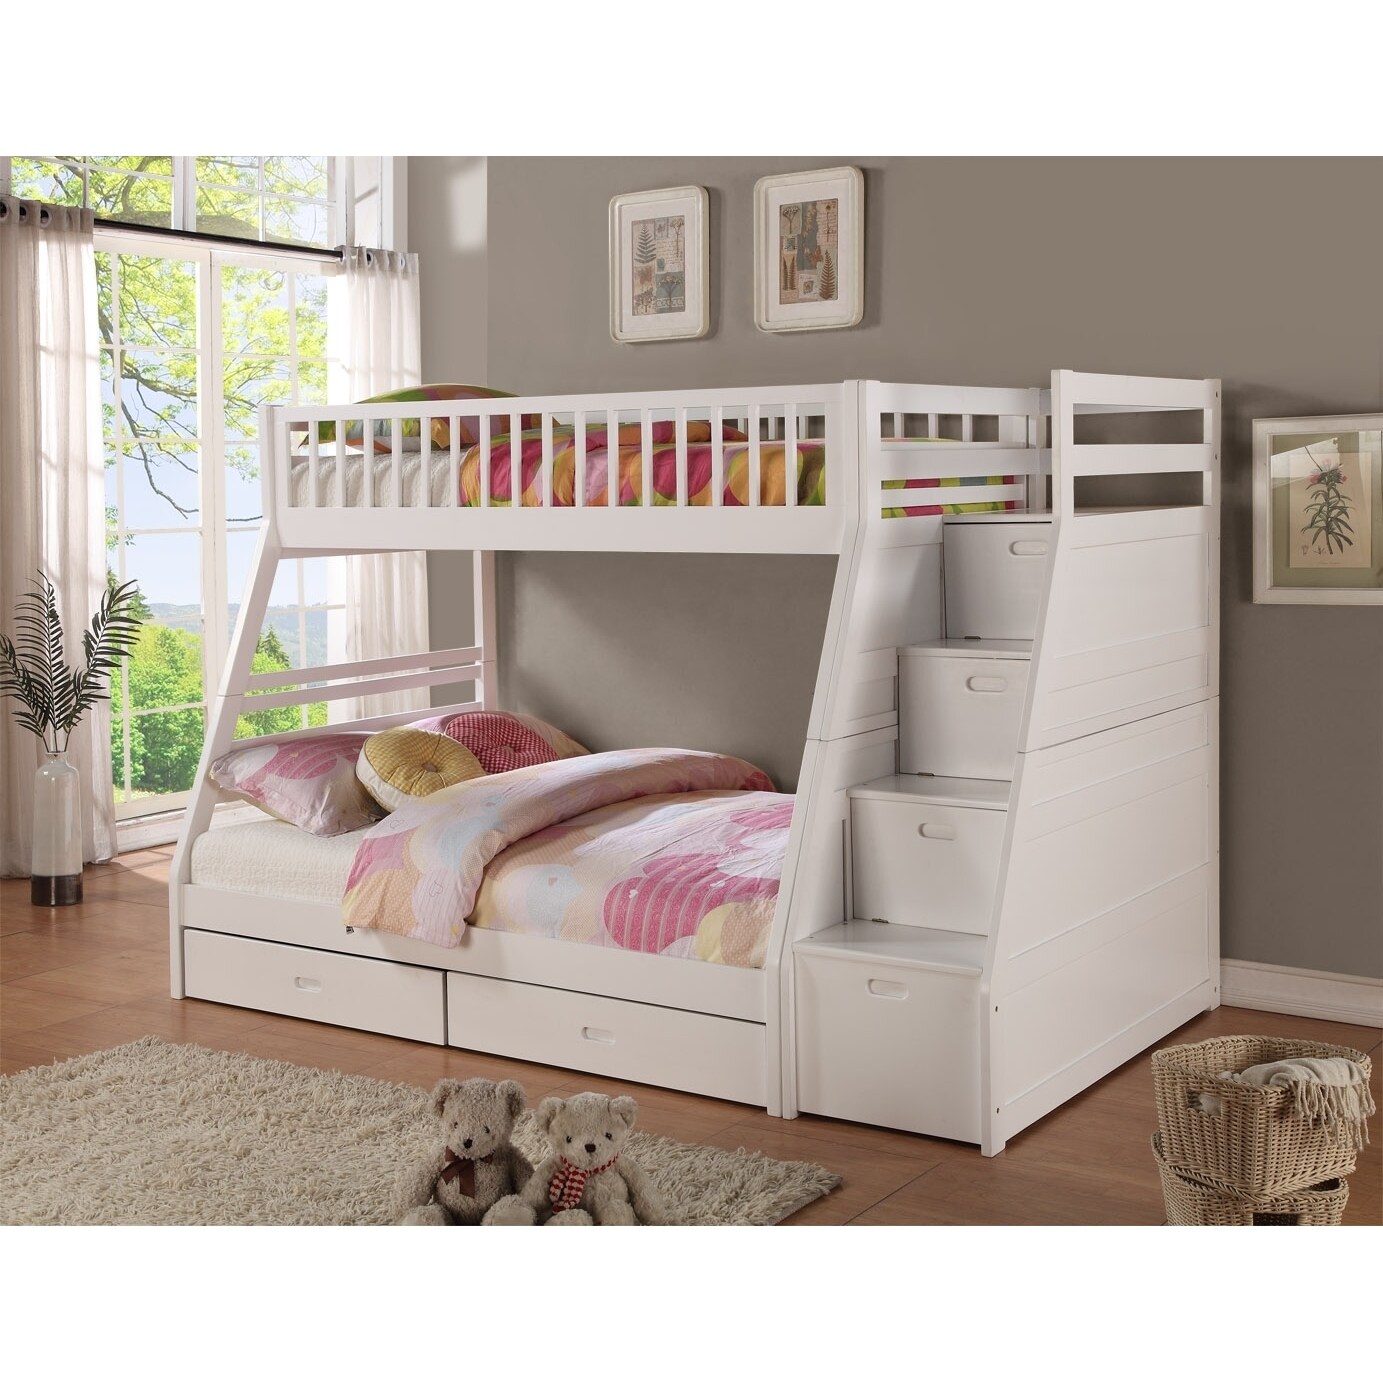 twin bed with stairs and drawers